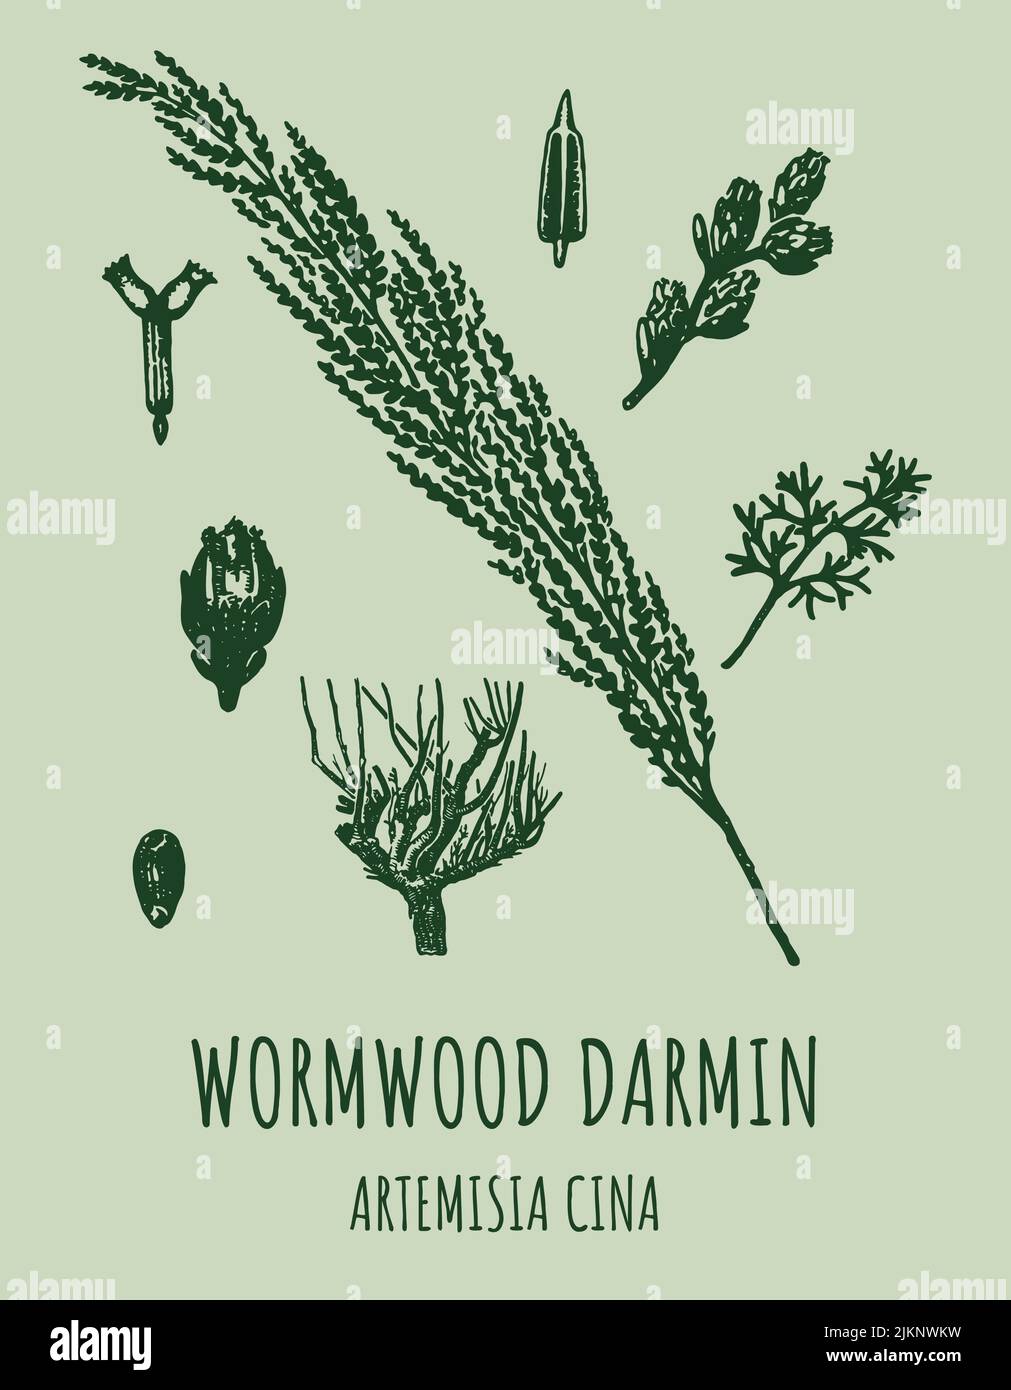 DARMIN Wormwood (Artemisia cina) illustration. Wormwood branch, leaves and wormwood flowers. Cosmetics and medical plant. Stock Vector